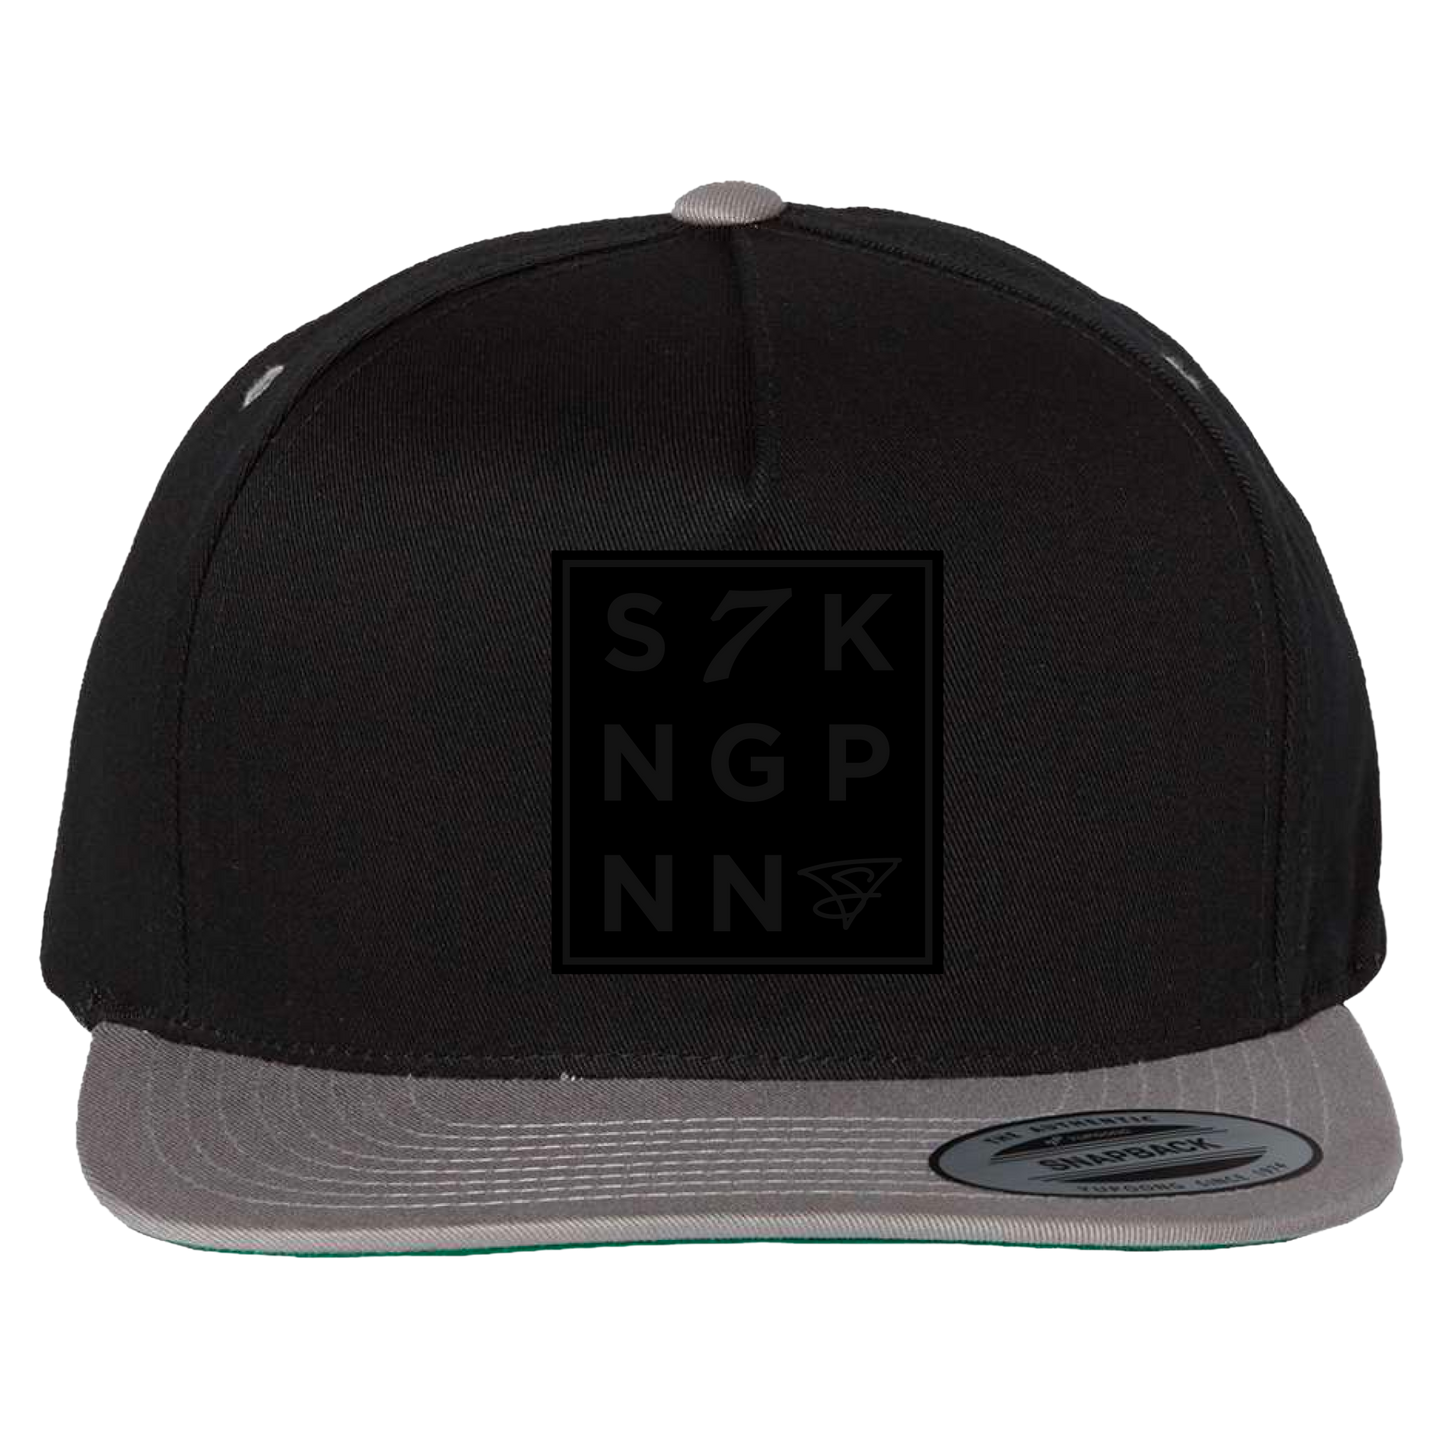 S7KNG Patch Hat